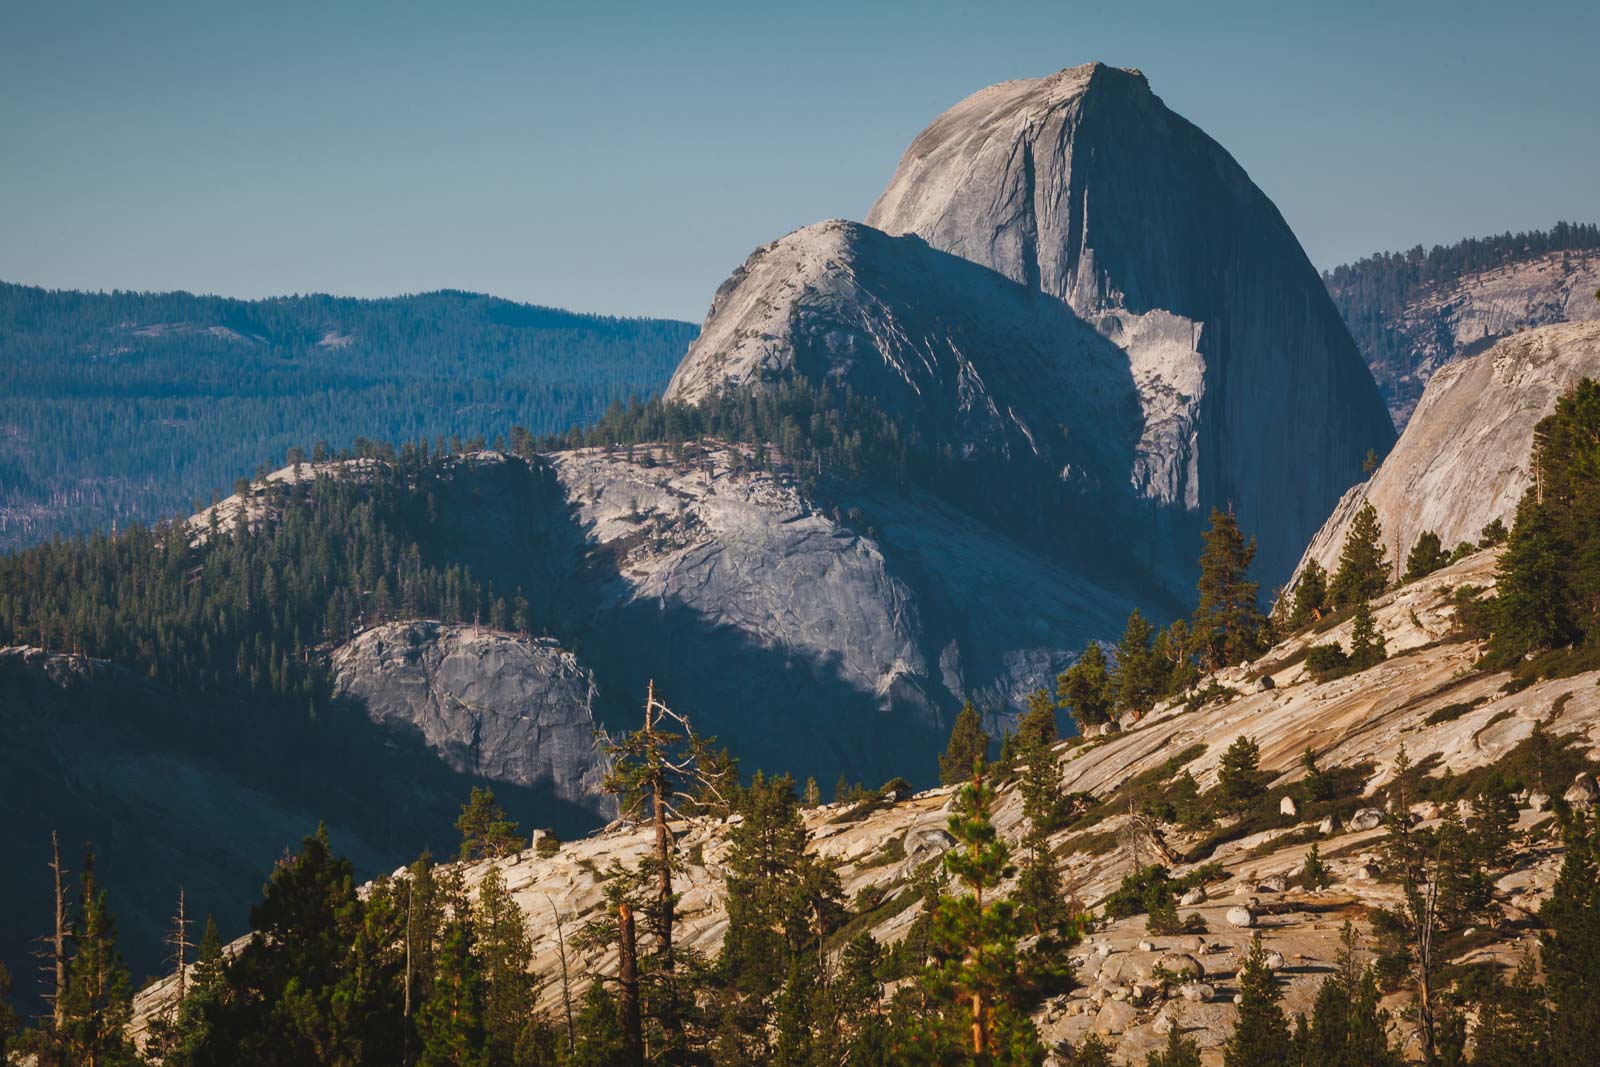 Guided Half Dome Trek, Hike Half Dome with a Guide